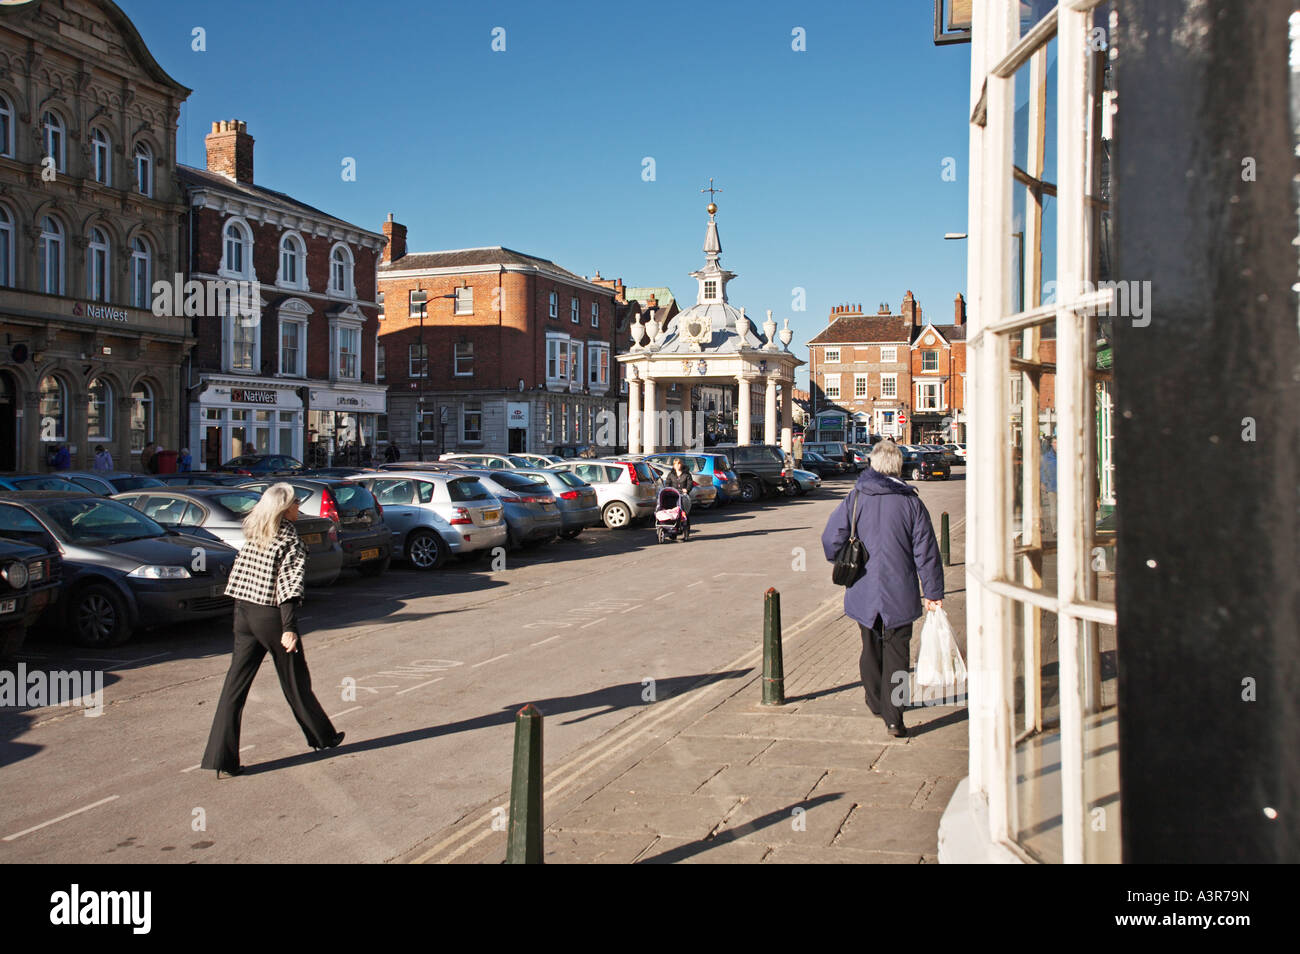 The town of Beverley East Yorkshire UK Stock Photo